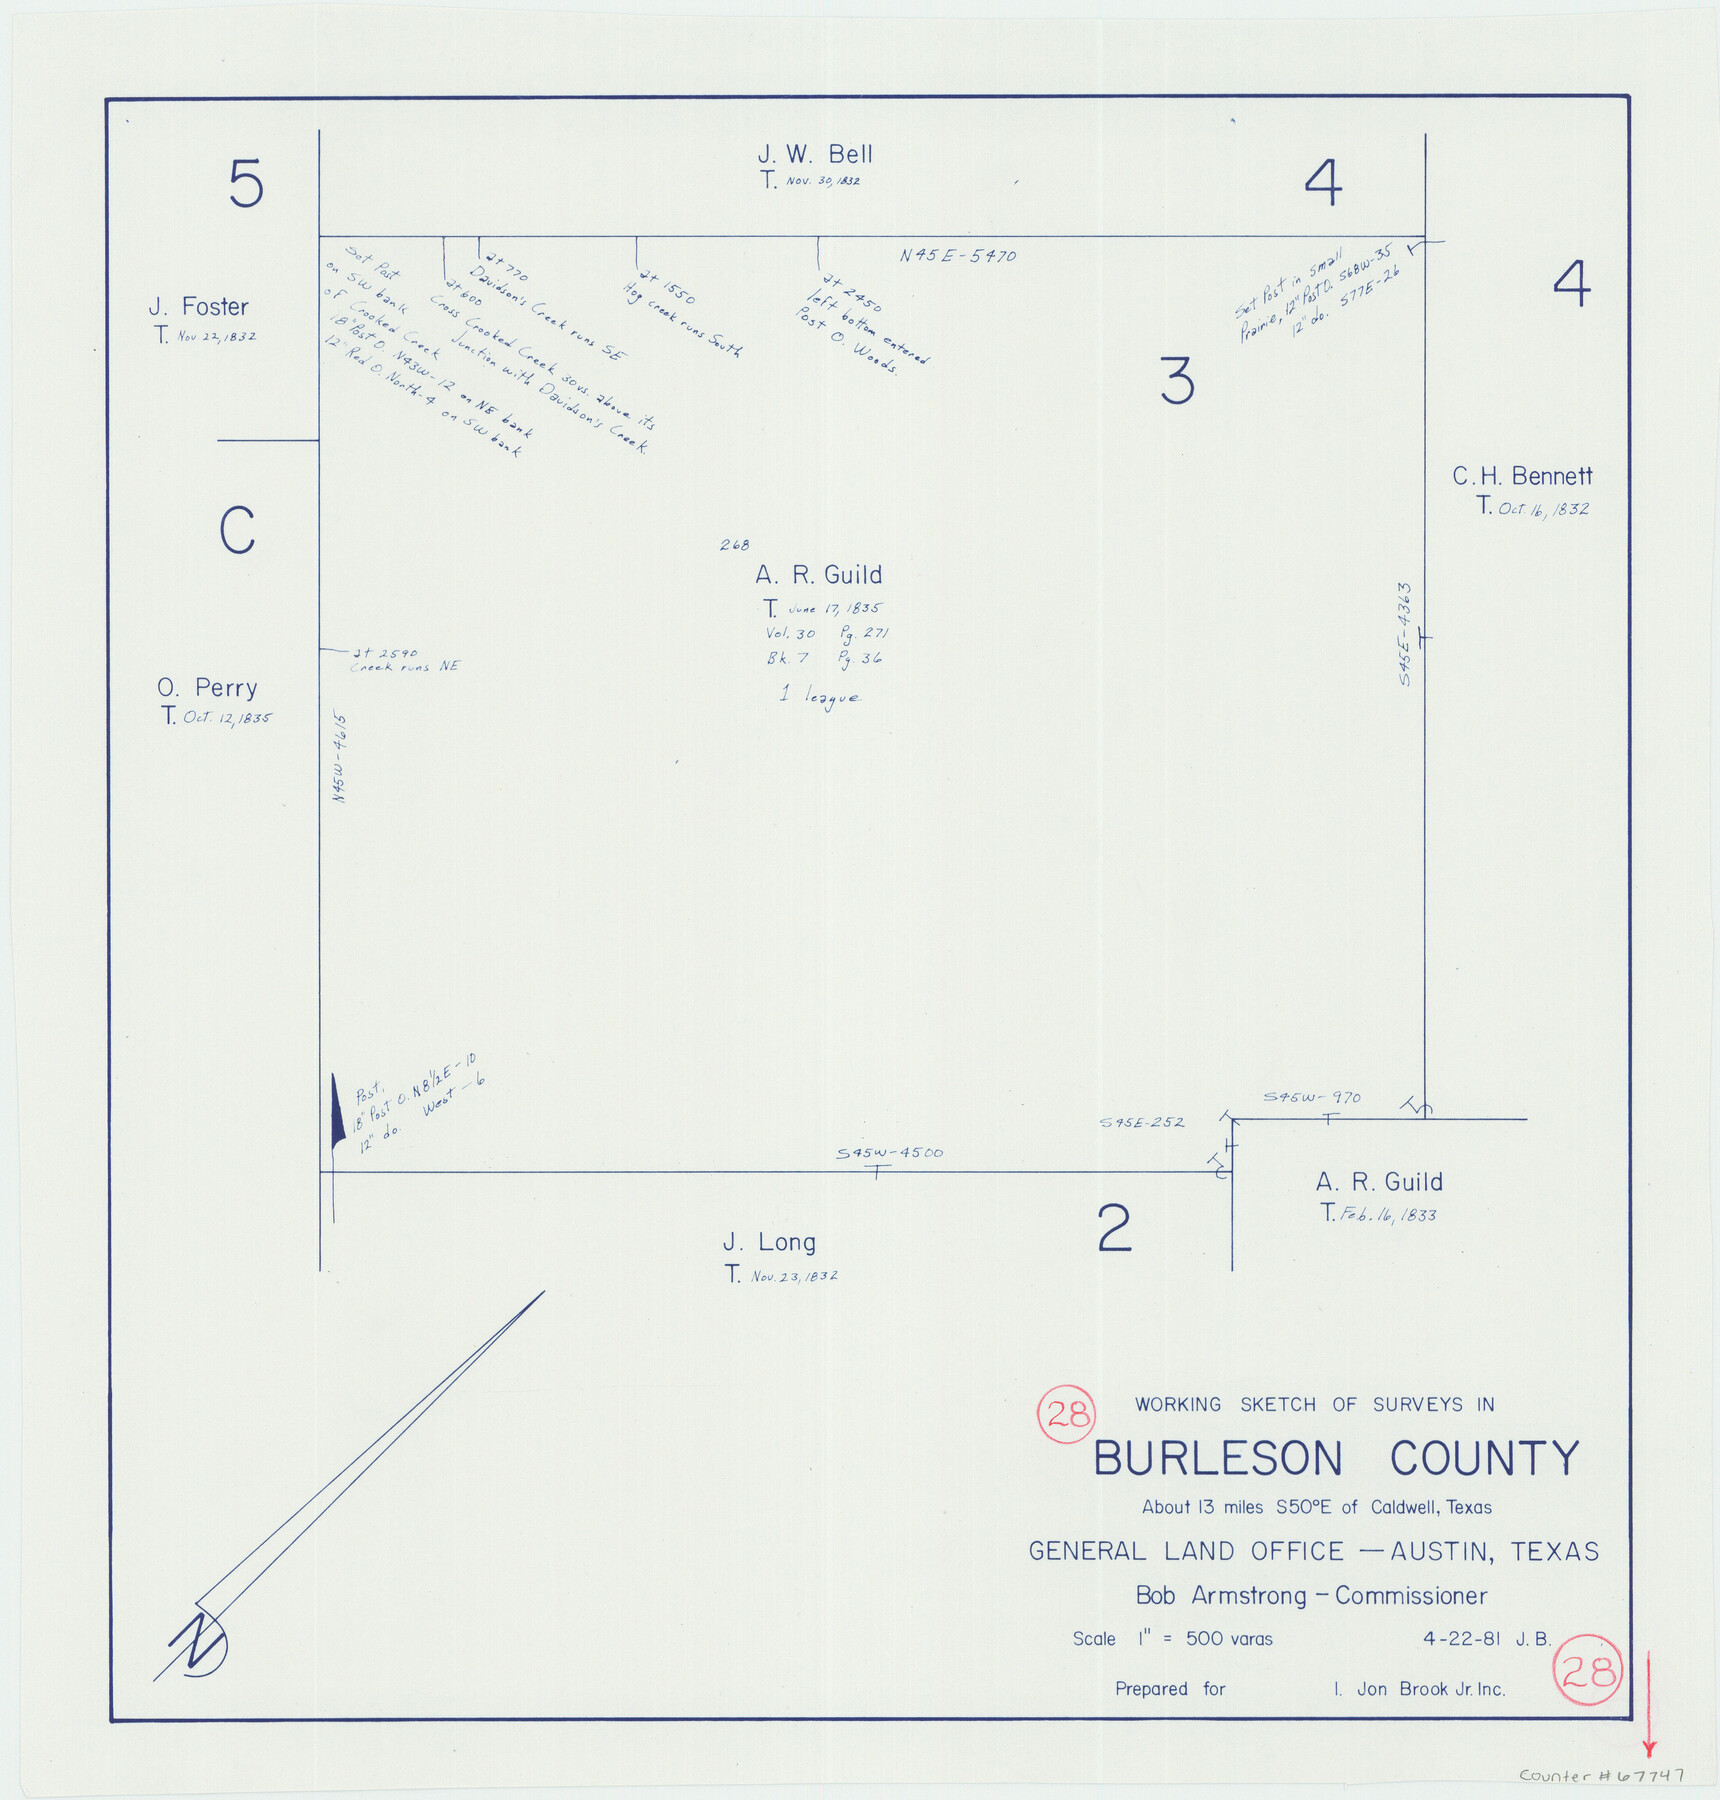 67747, Burleson County Working Sketch 28, General Map Collection